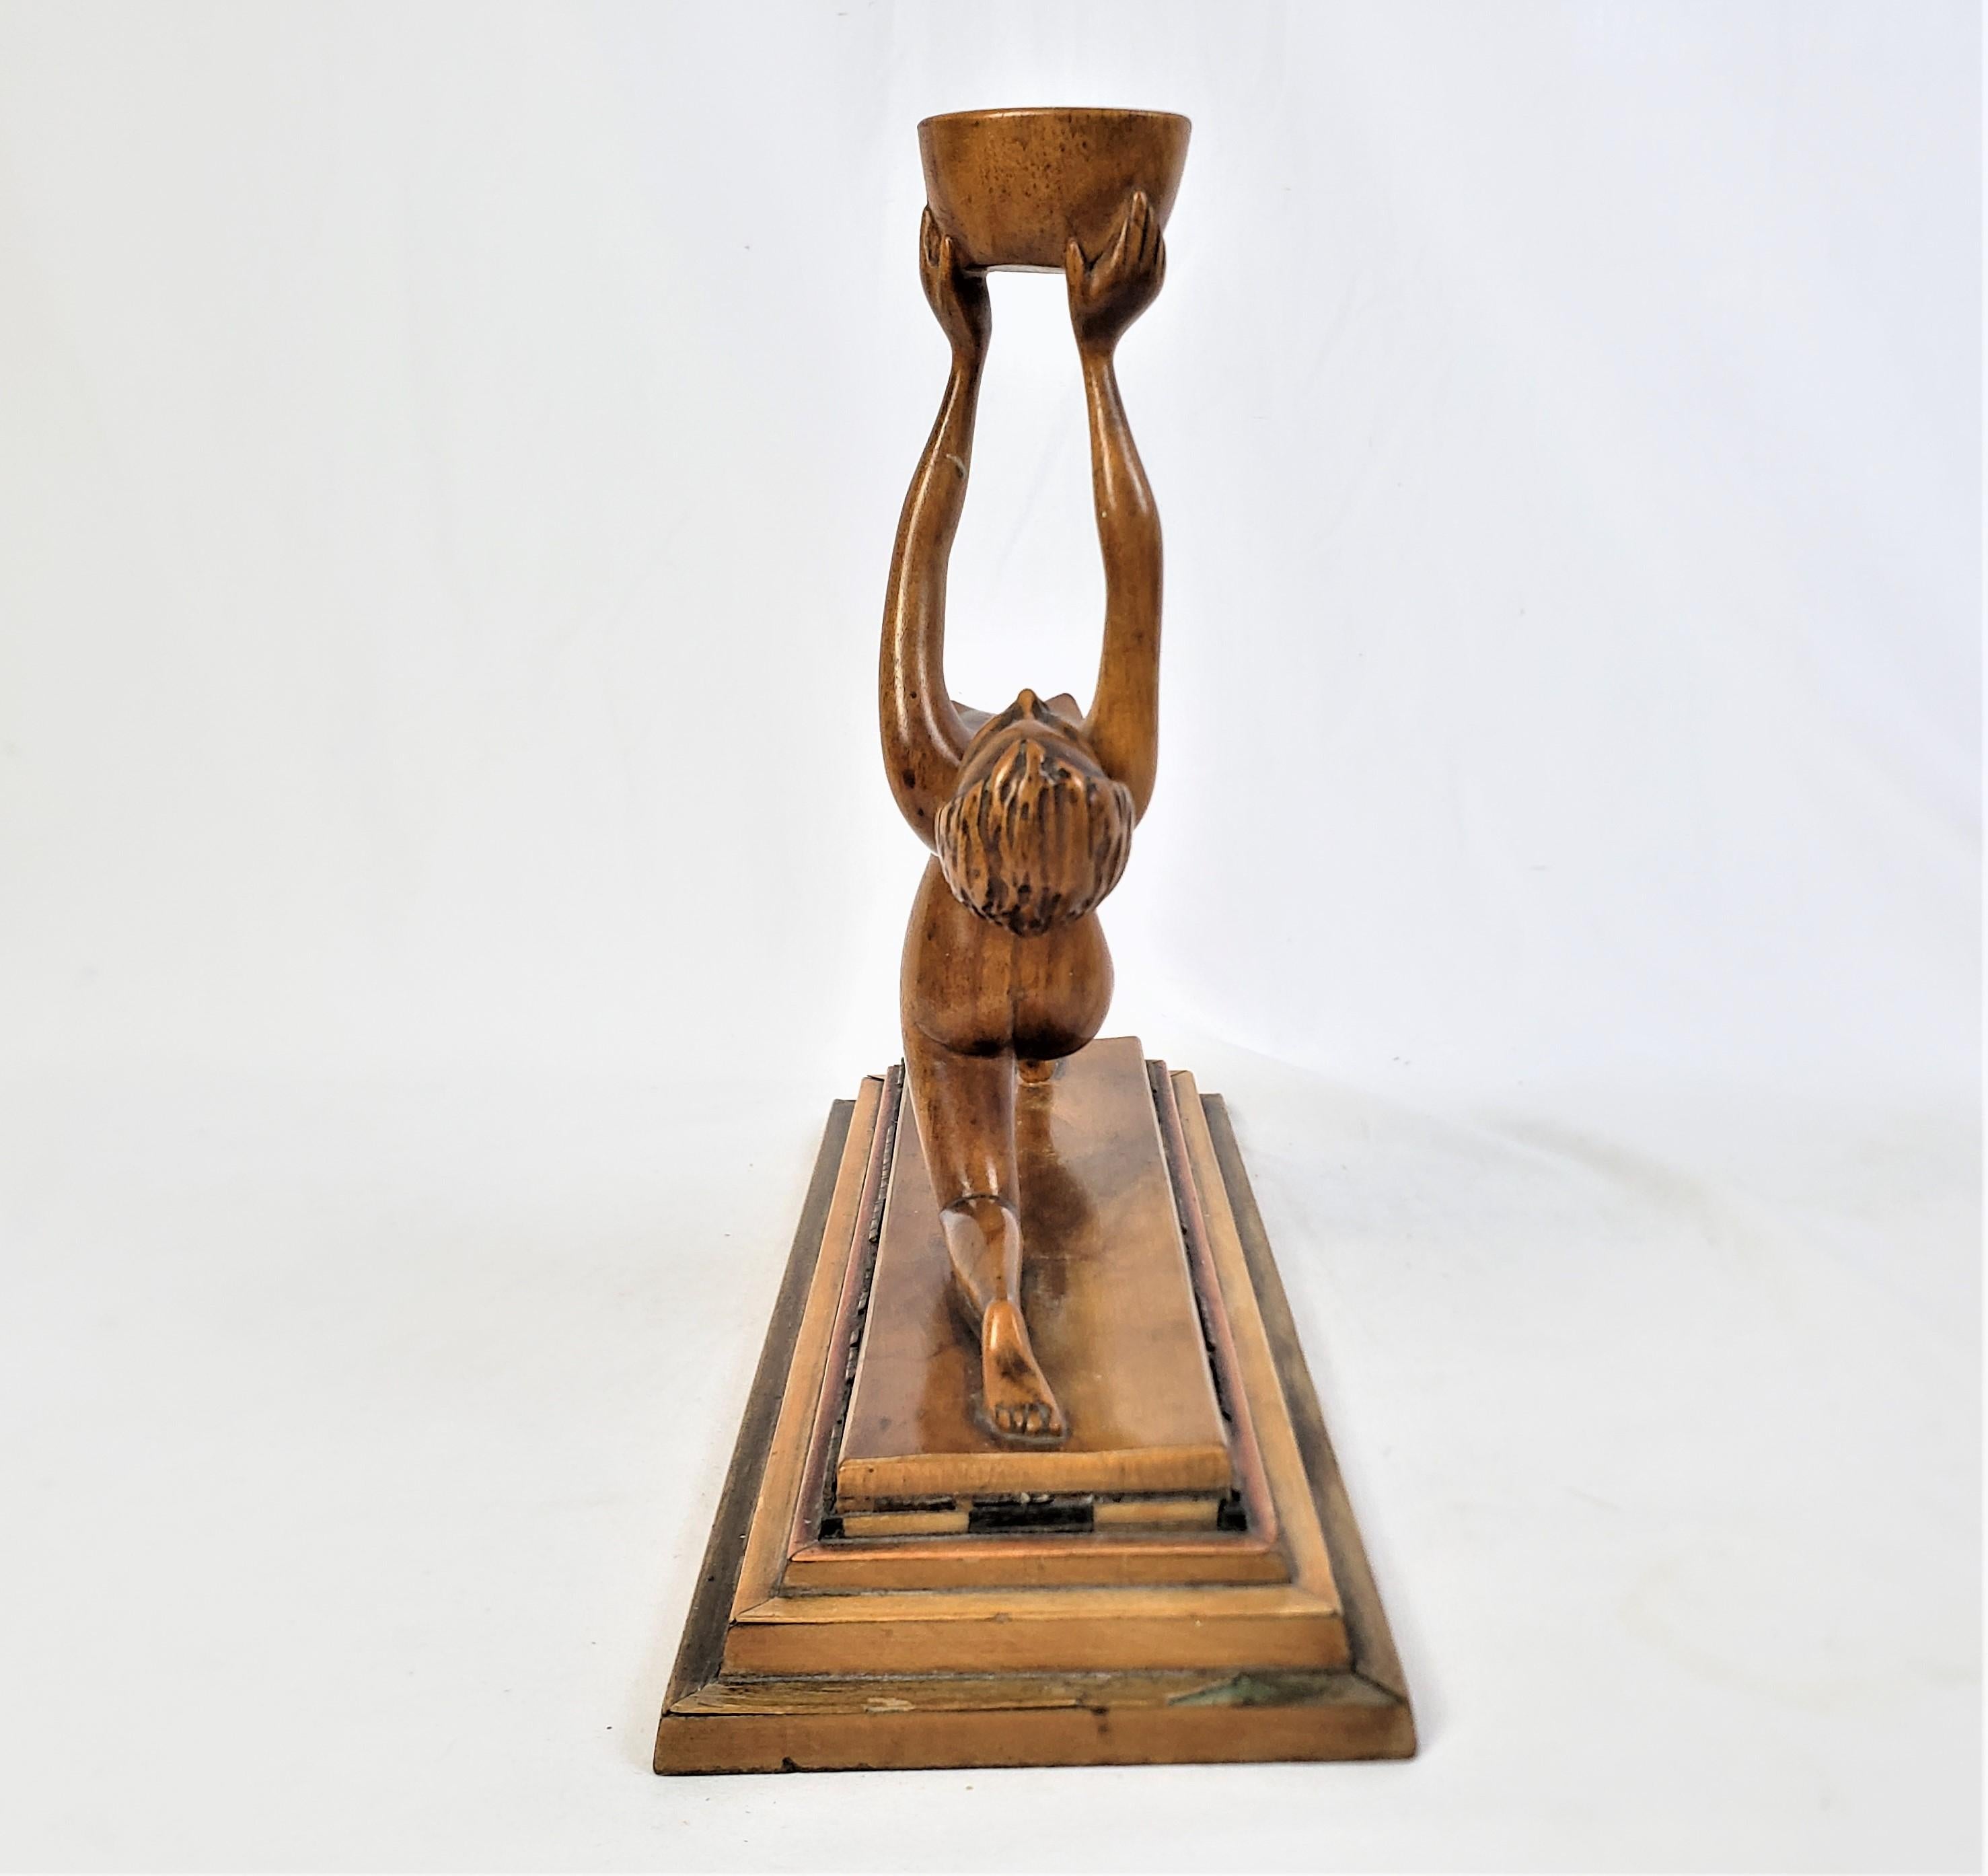 Antique Art Deco Hand-Carved Wooden Sculpture of a Nude Female Holding a Basket In Good Condition For Sale In Hamilton, Ontario